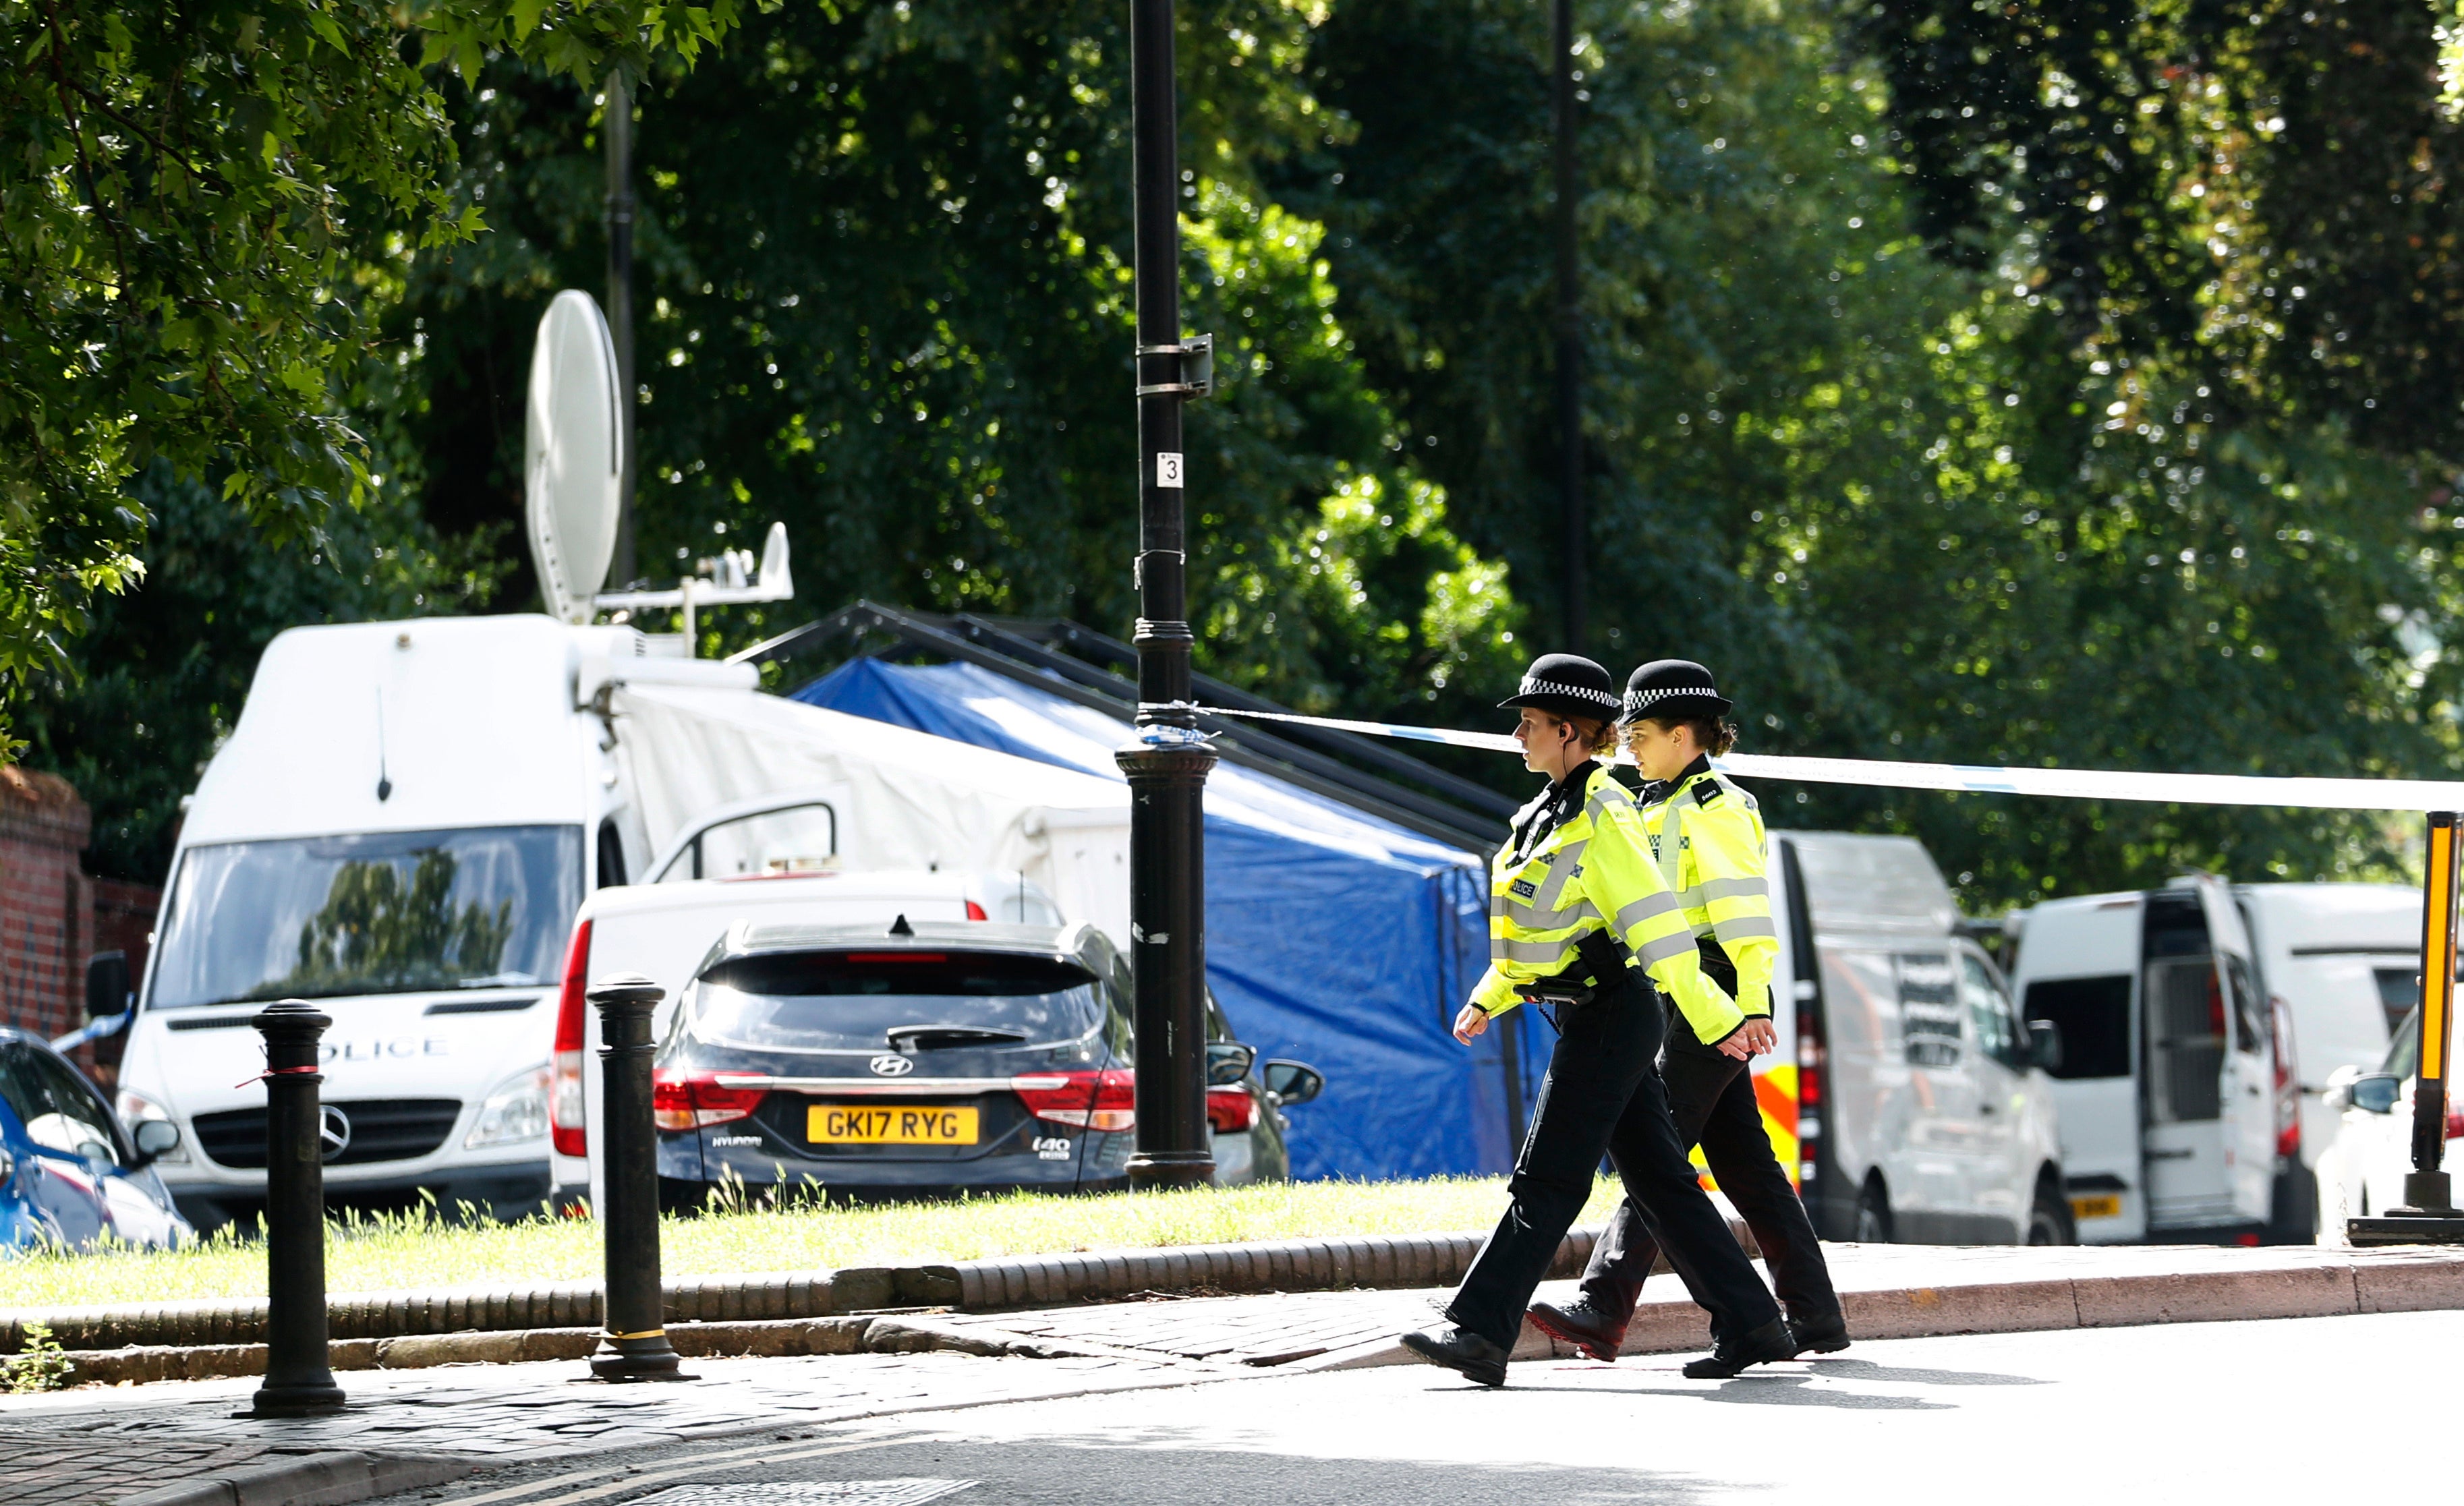 Police outside Forbury Gardens in Reading, where an Islamist terrorist murdered three friends in the park in June 2020